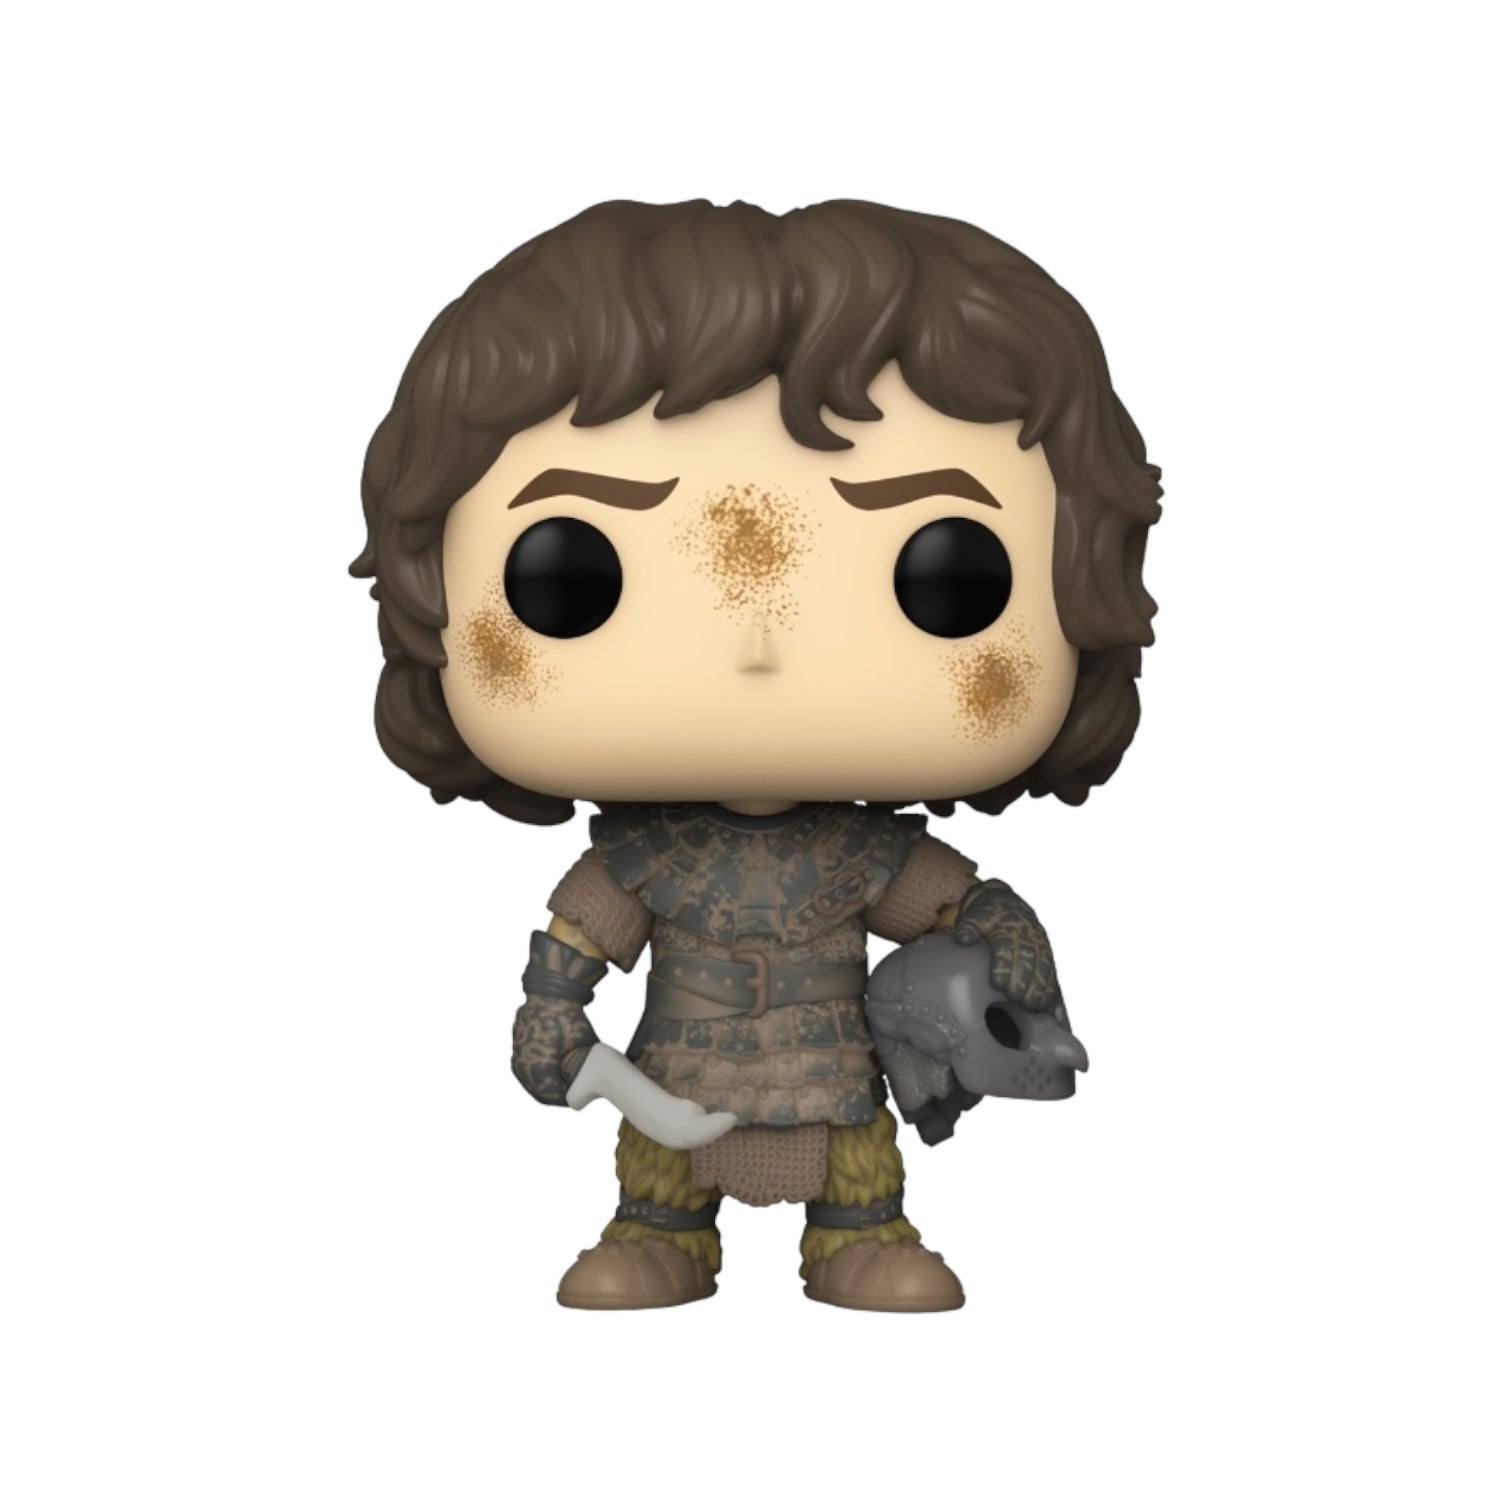 Frodo with Orc Helmet #1565 Funko Pop! - The Lord Of The Rings - Funko Shop Exclusive